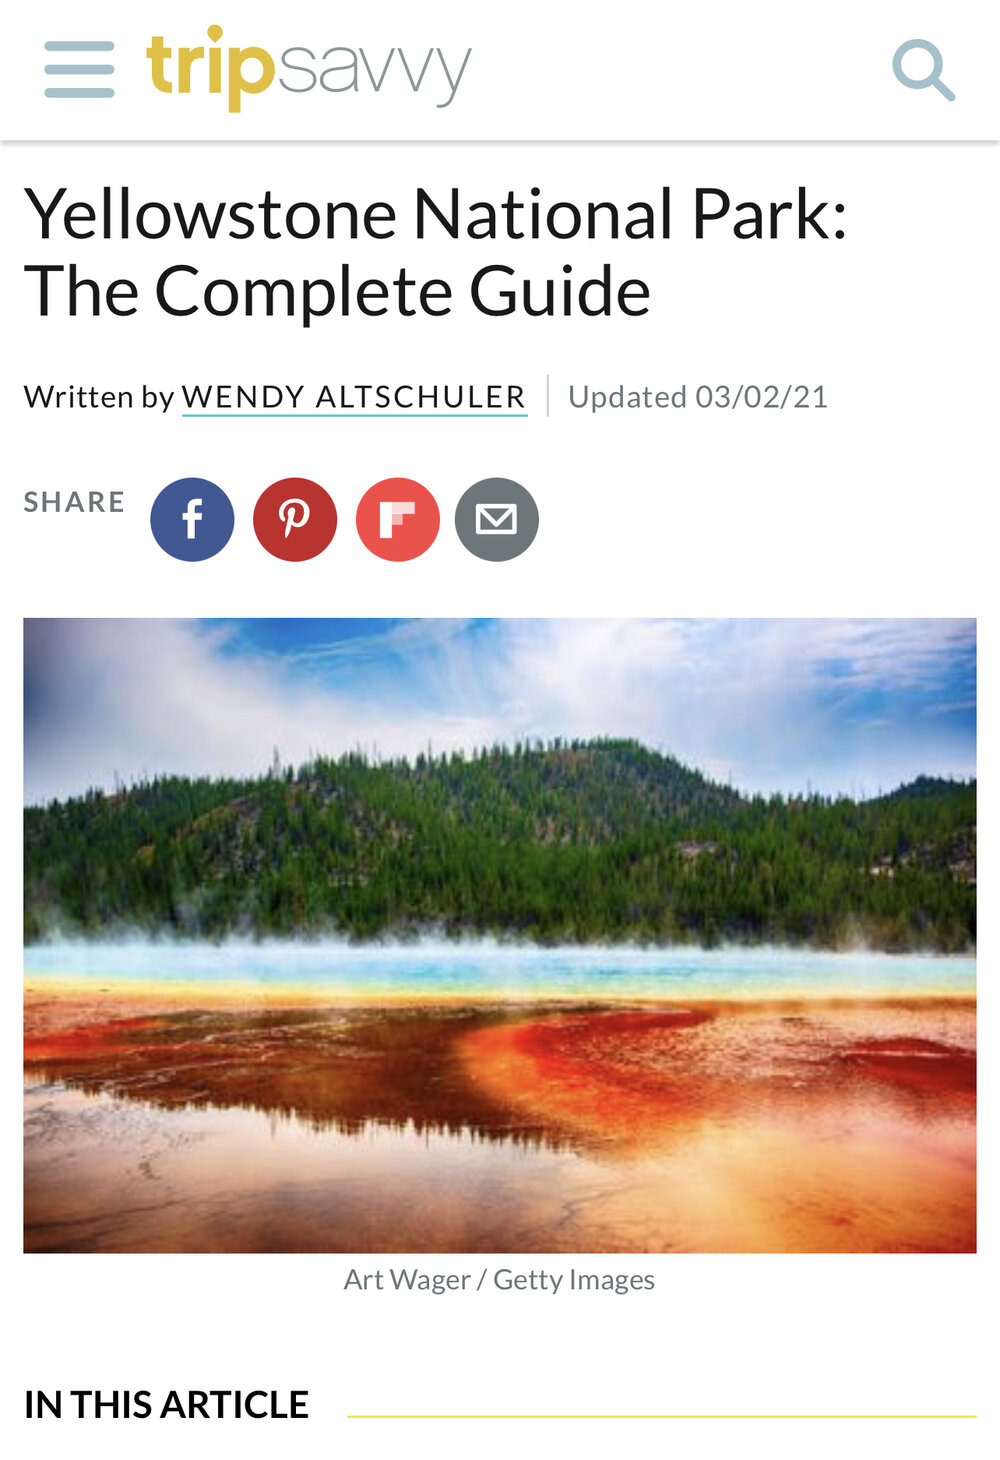 Yellowstone National Park: The Complete Guide